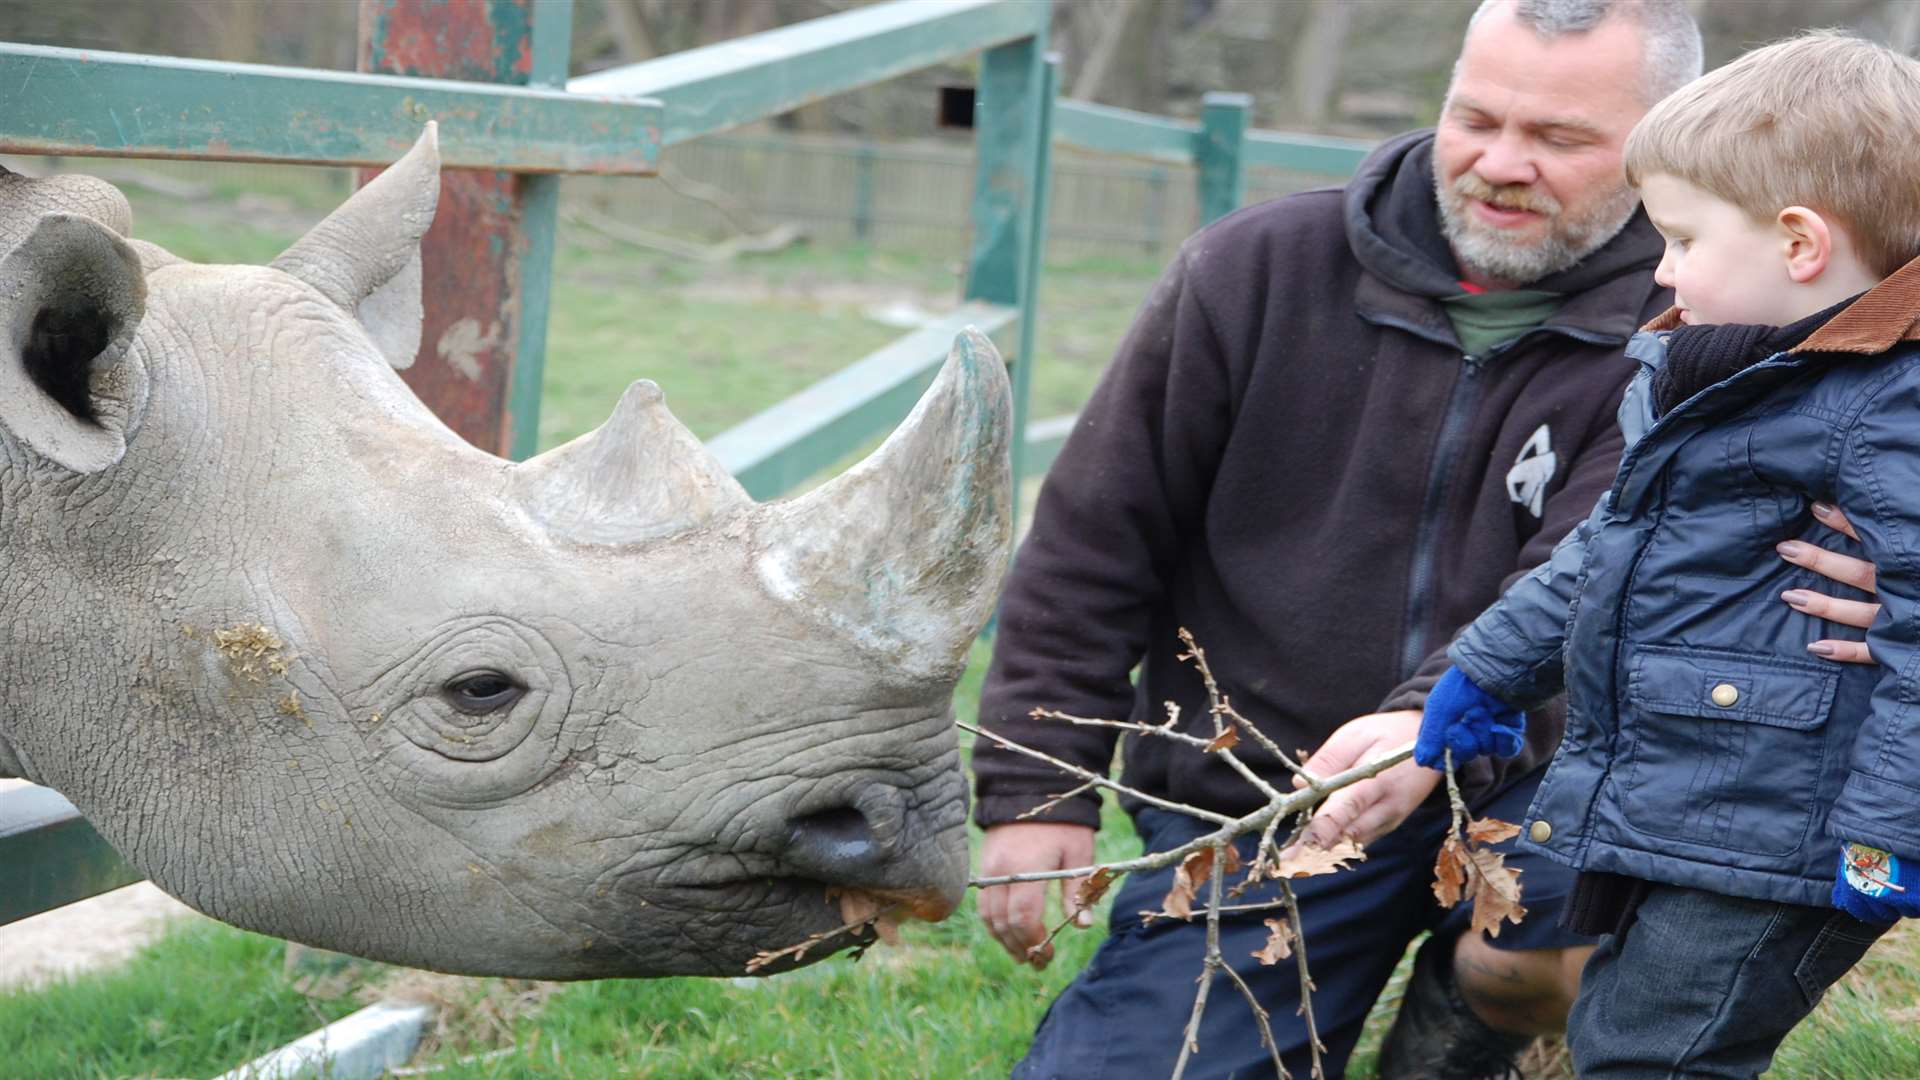 Get up close and personal at Port Lympne